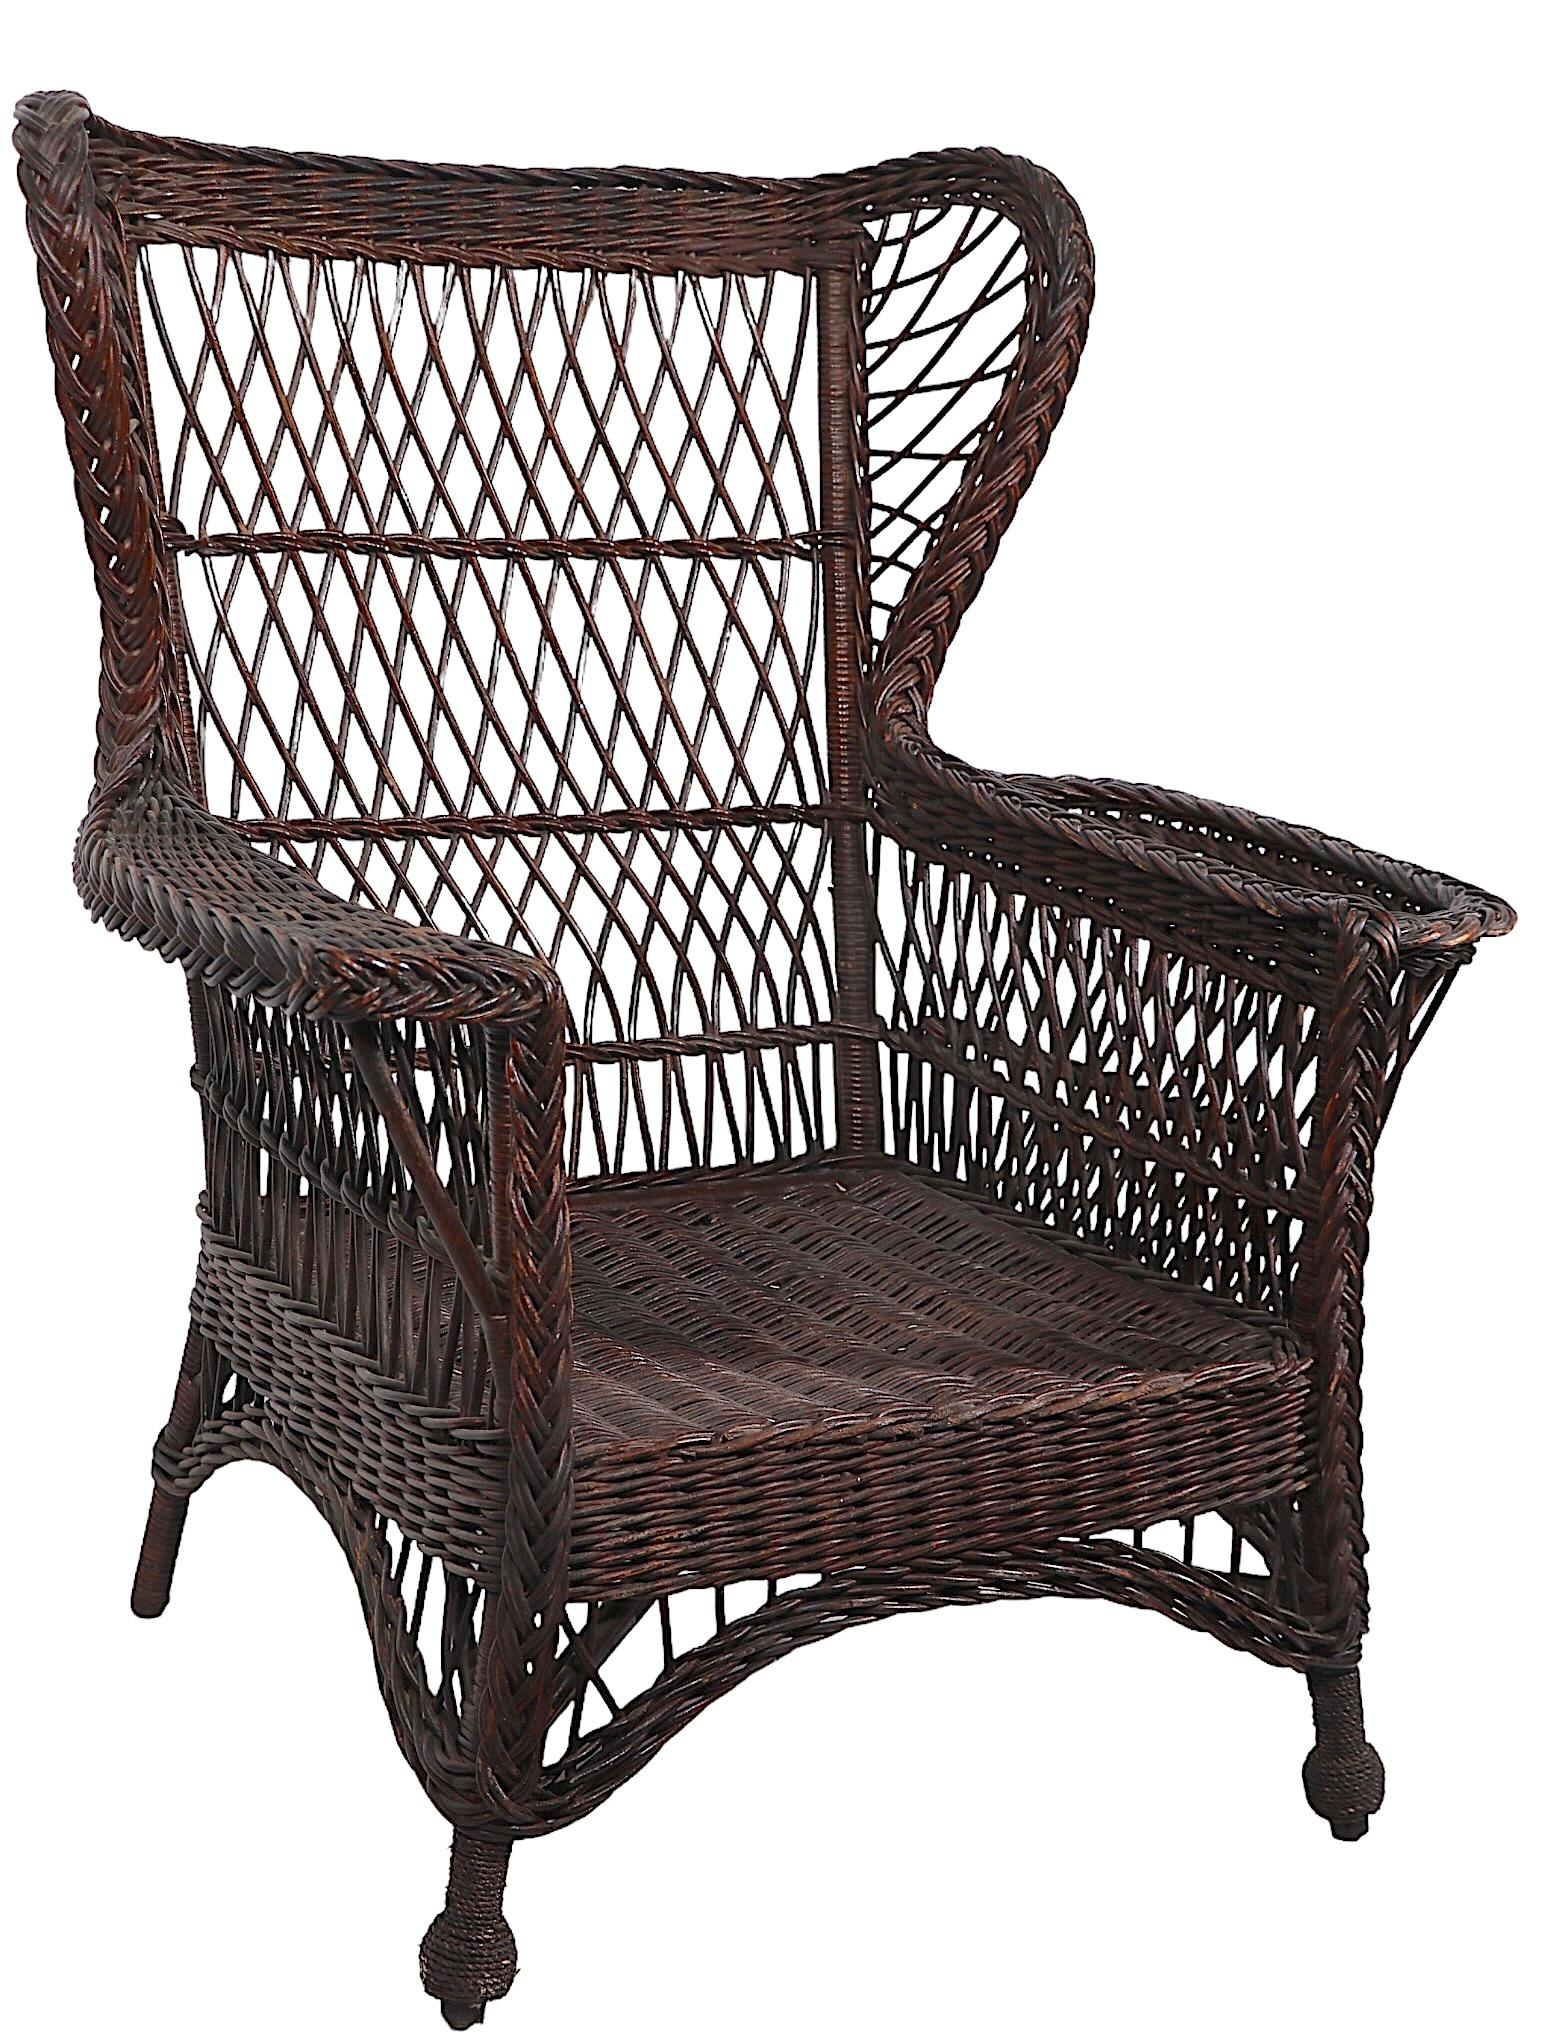 Victorian Bar Harbor Wicker Wing Chair with Magazine Rack Arm For Sale 10